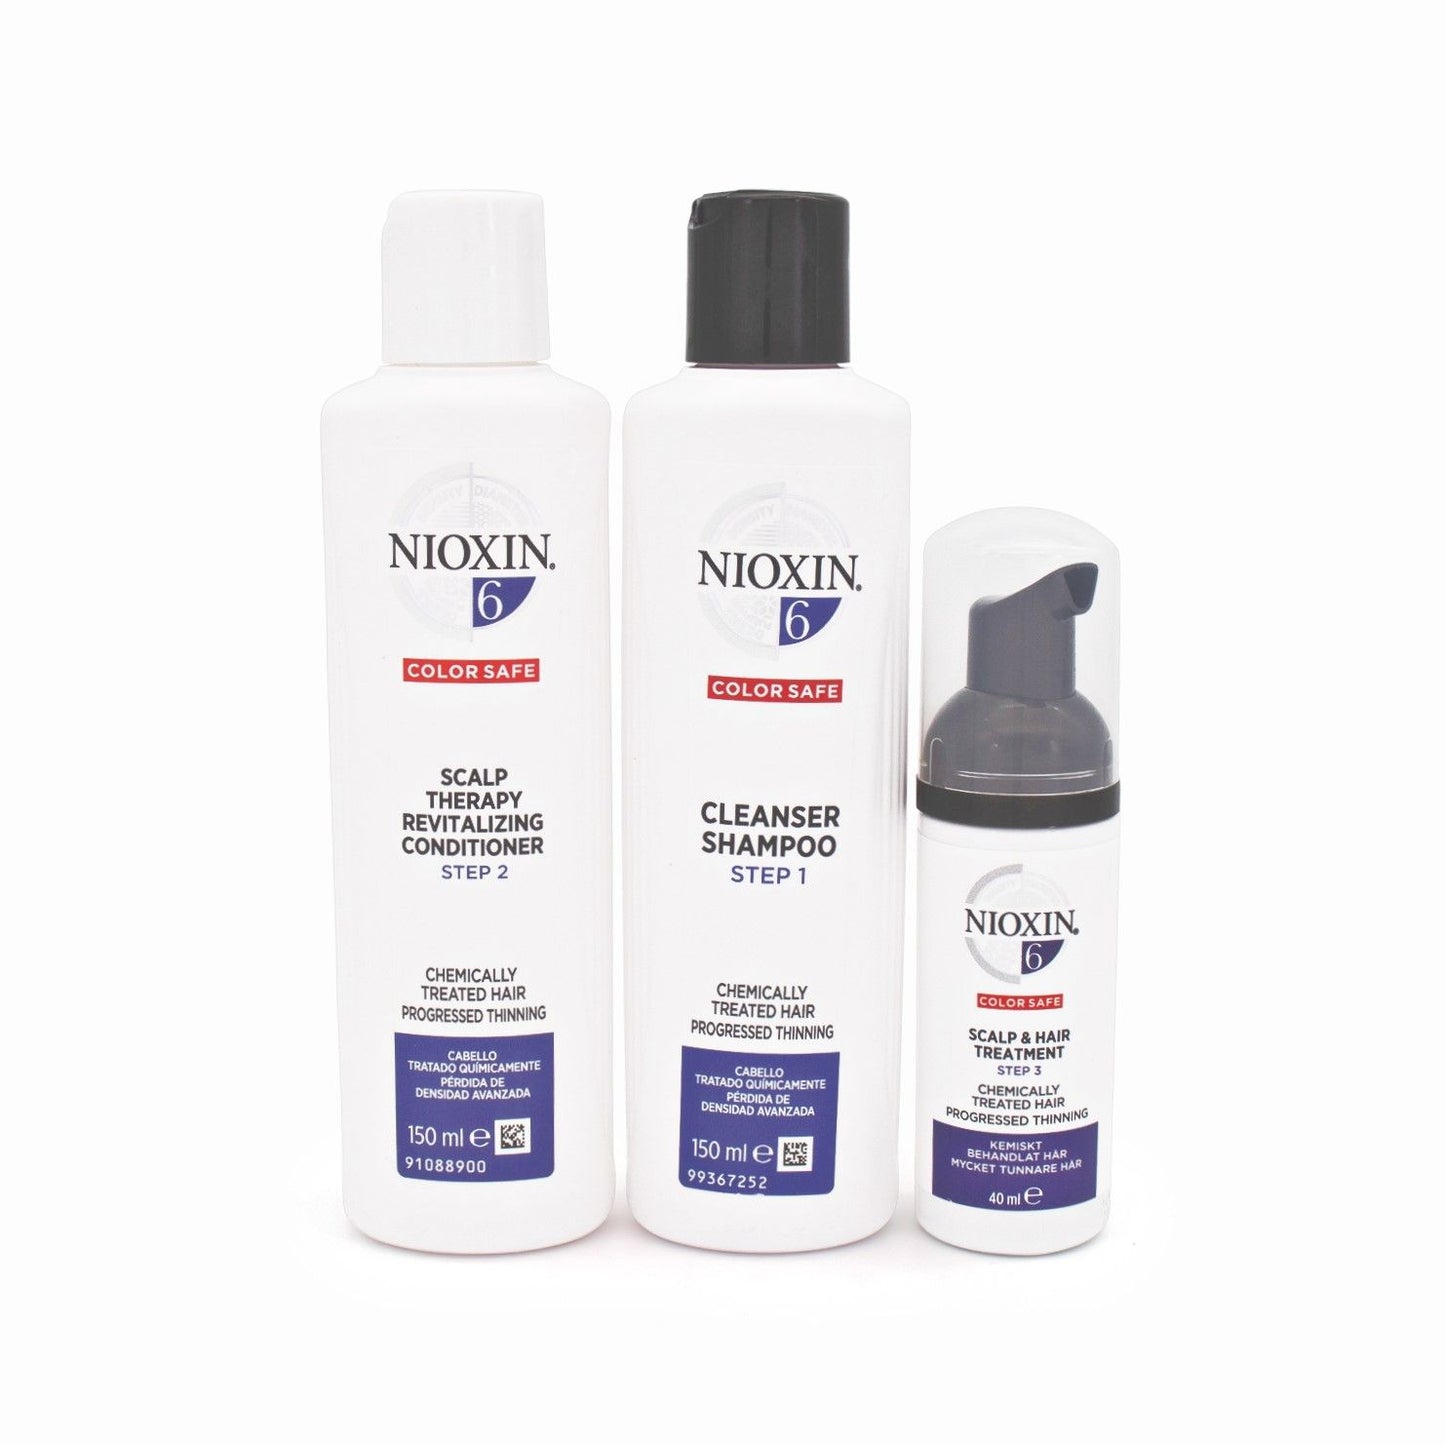 NIOXIN 3-Part System 6 Chemically Treated Hair Trial Kit - Imperfect Box